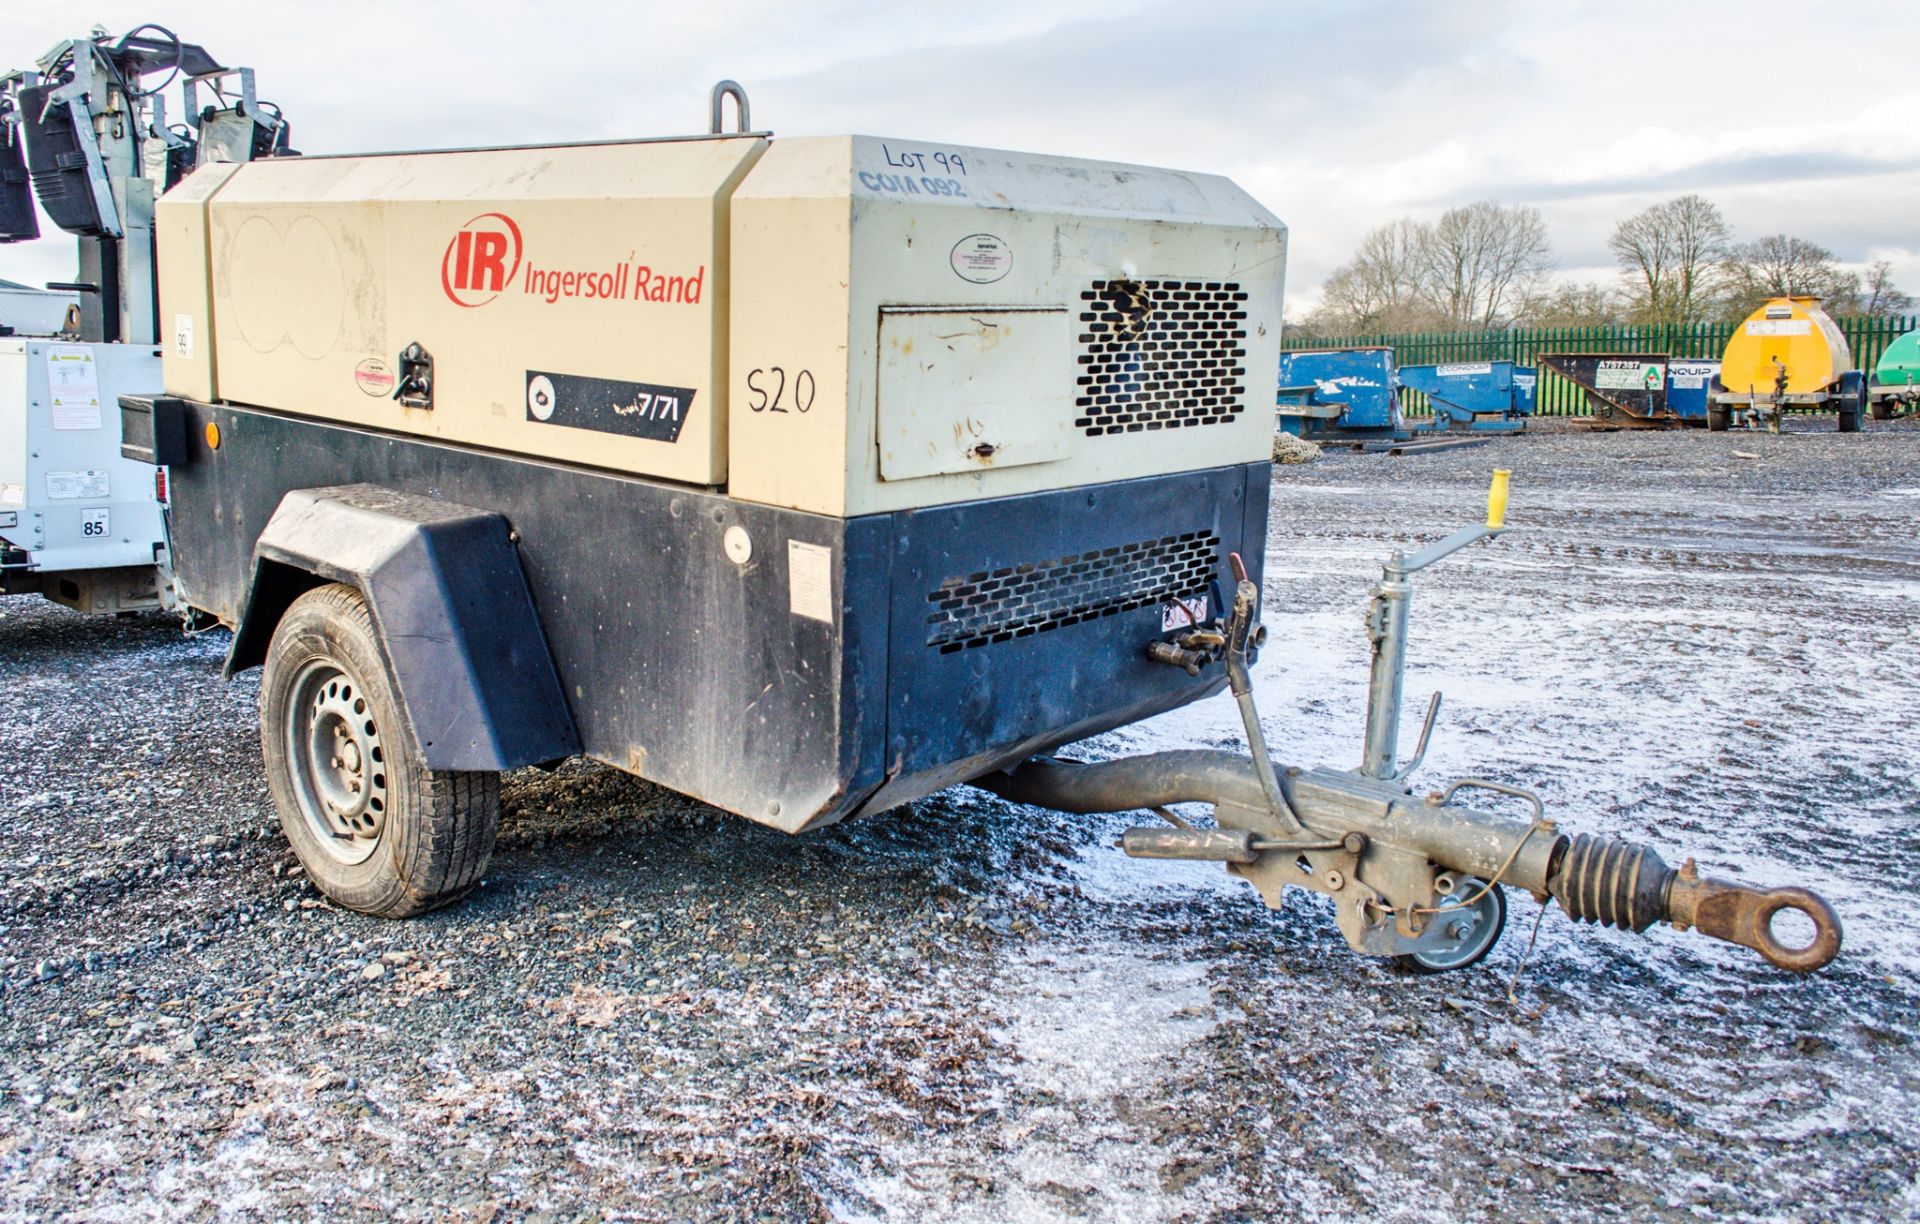 Ingersoll Rand 7/71 diesel driven air compressor Year: 2006 S/N: 521720 Recorded Hours: 3503